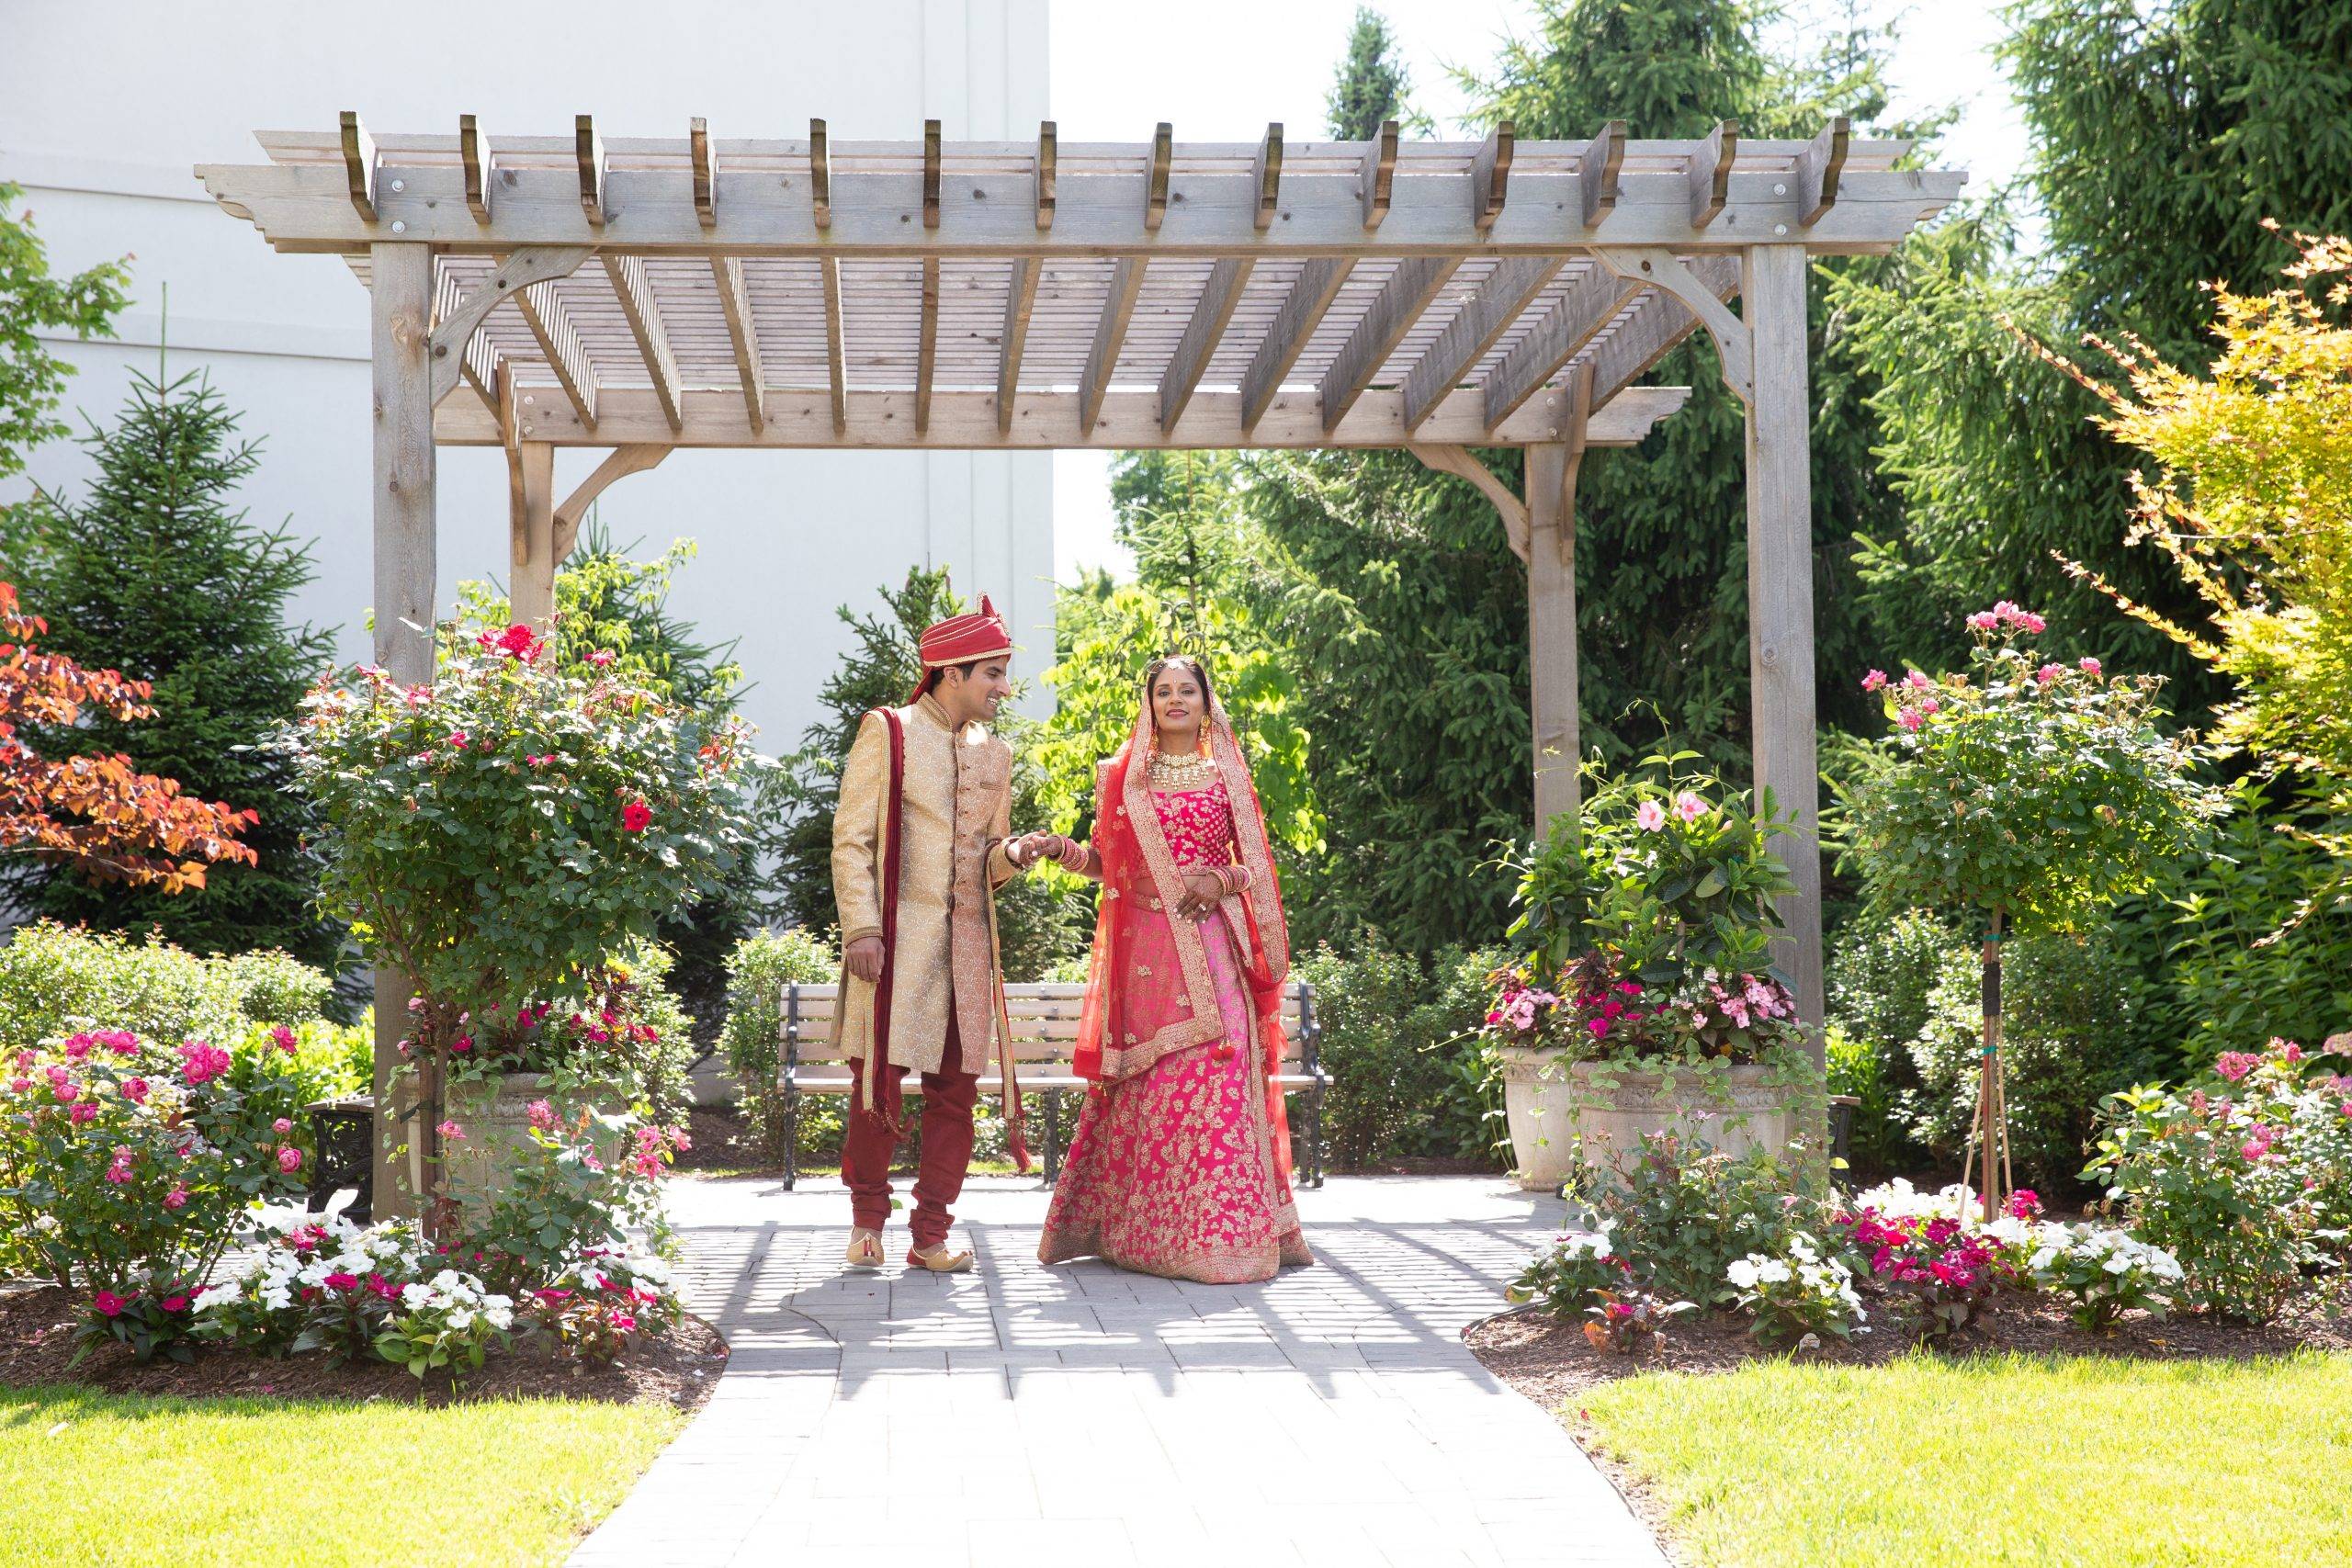 A bride and groom standing under a gazebo in a garden.